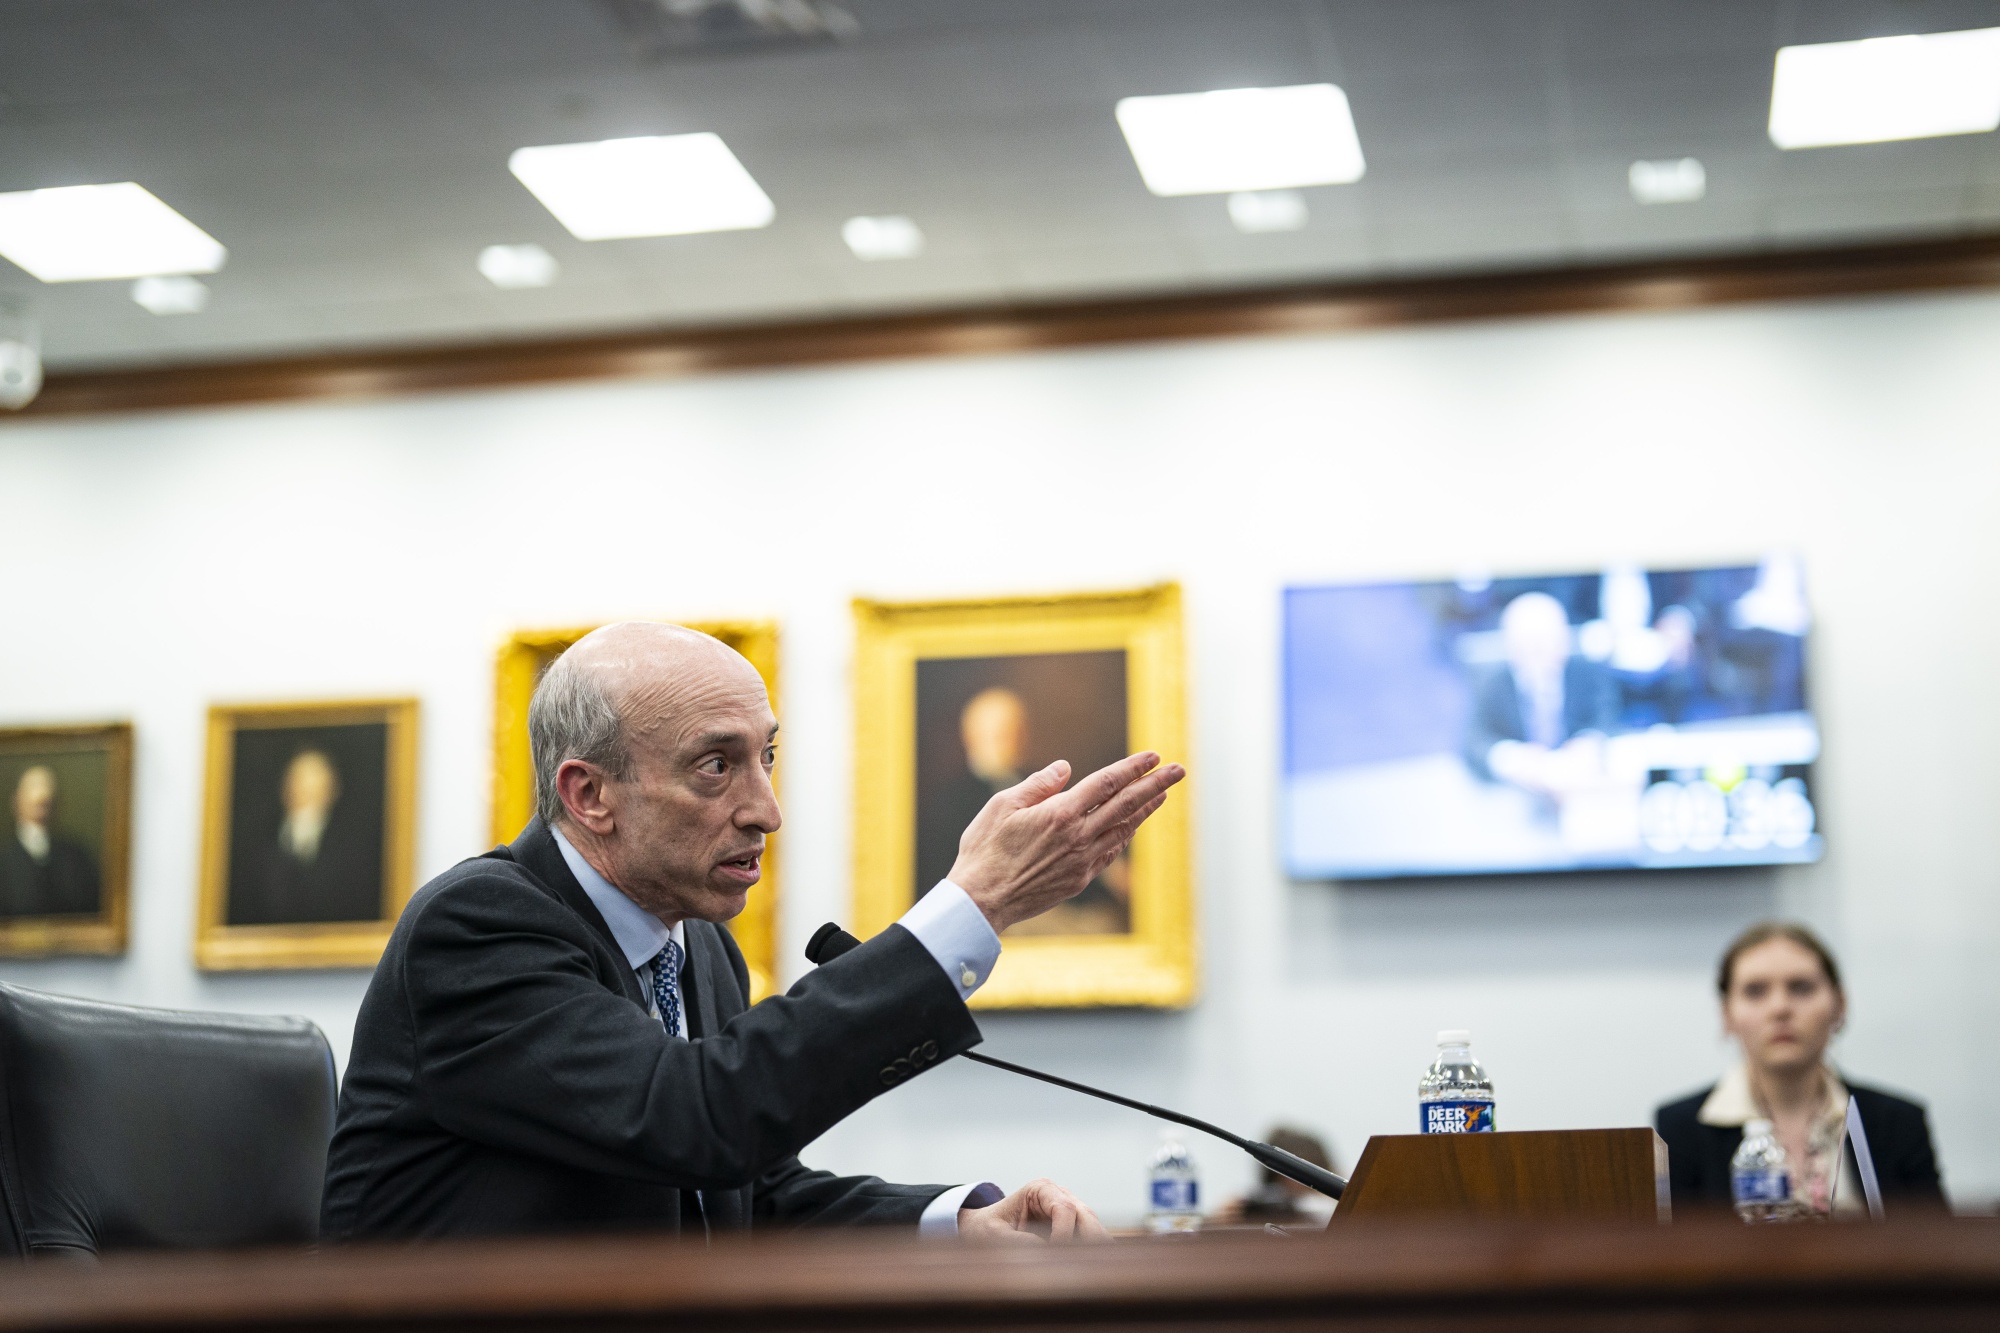 The US Securities and Exchange Commission is looking into possible trading based on inside information at First Republic Bank, prior to its seizure by the federal government and sale to JPMorgan. Above, SEC Chairman Gary Gensler testifies during a House Appropriations Subcommittee hearing in Washington on March 29.